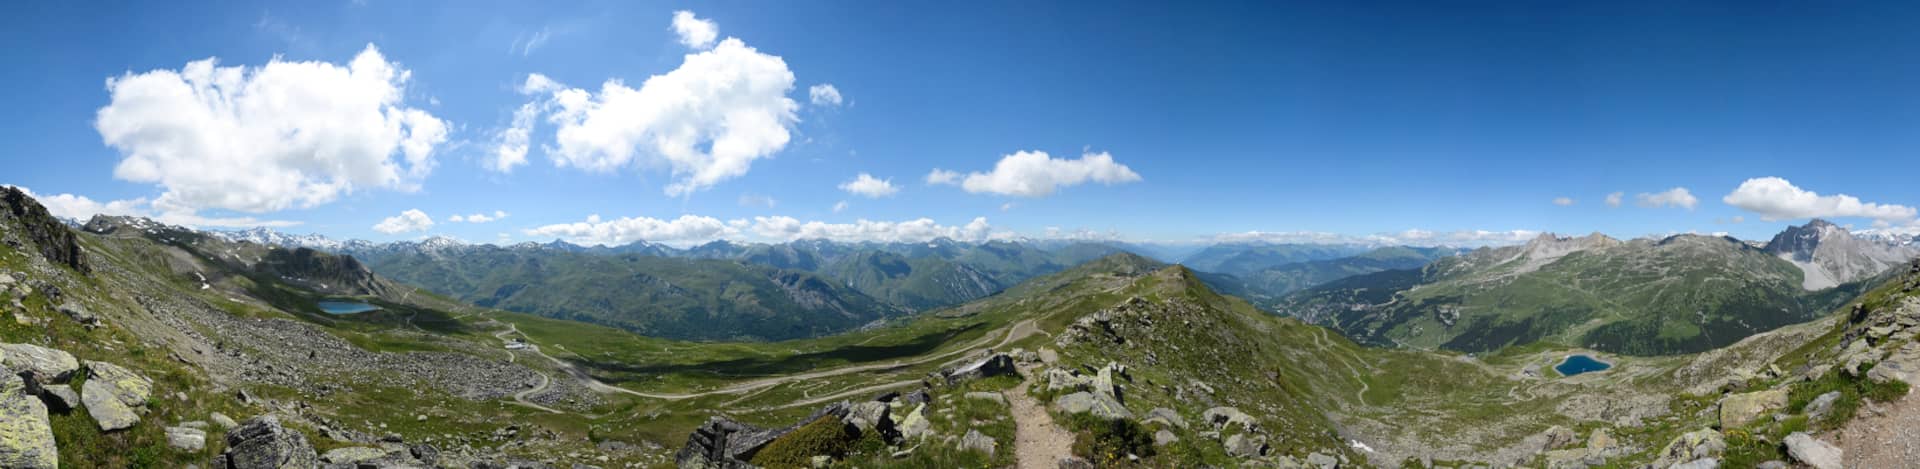 Panoramic view from Le Roc de Tougne, situated between Méribel and Les Menuires